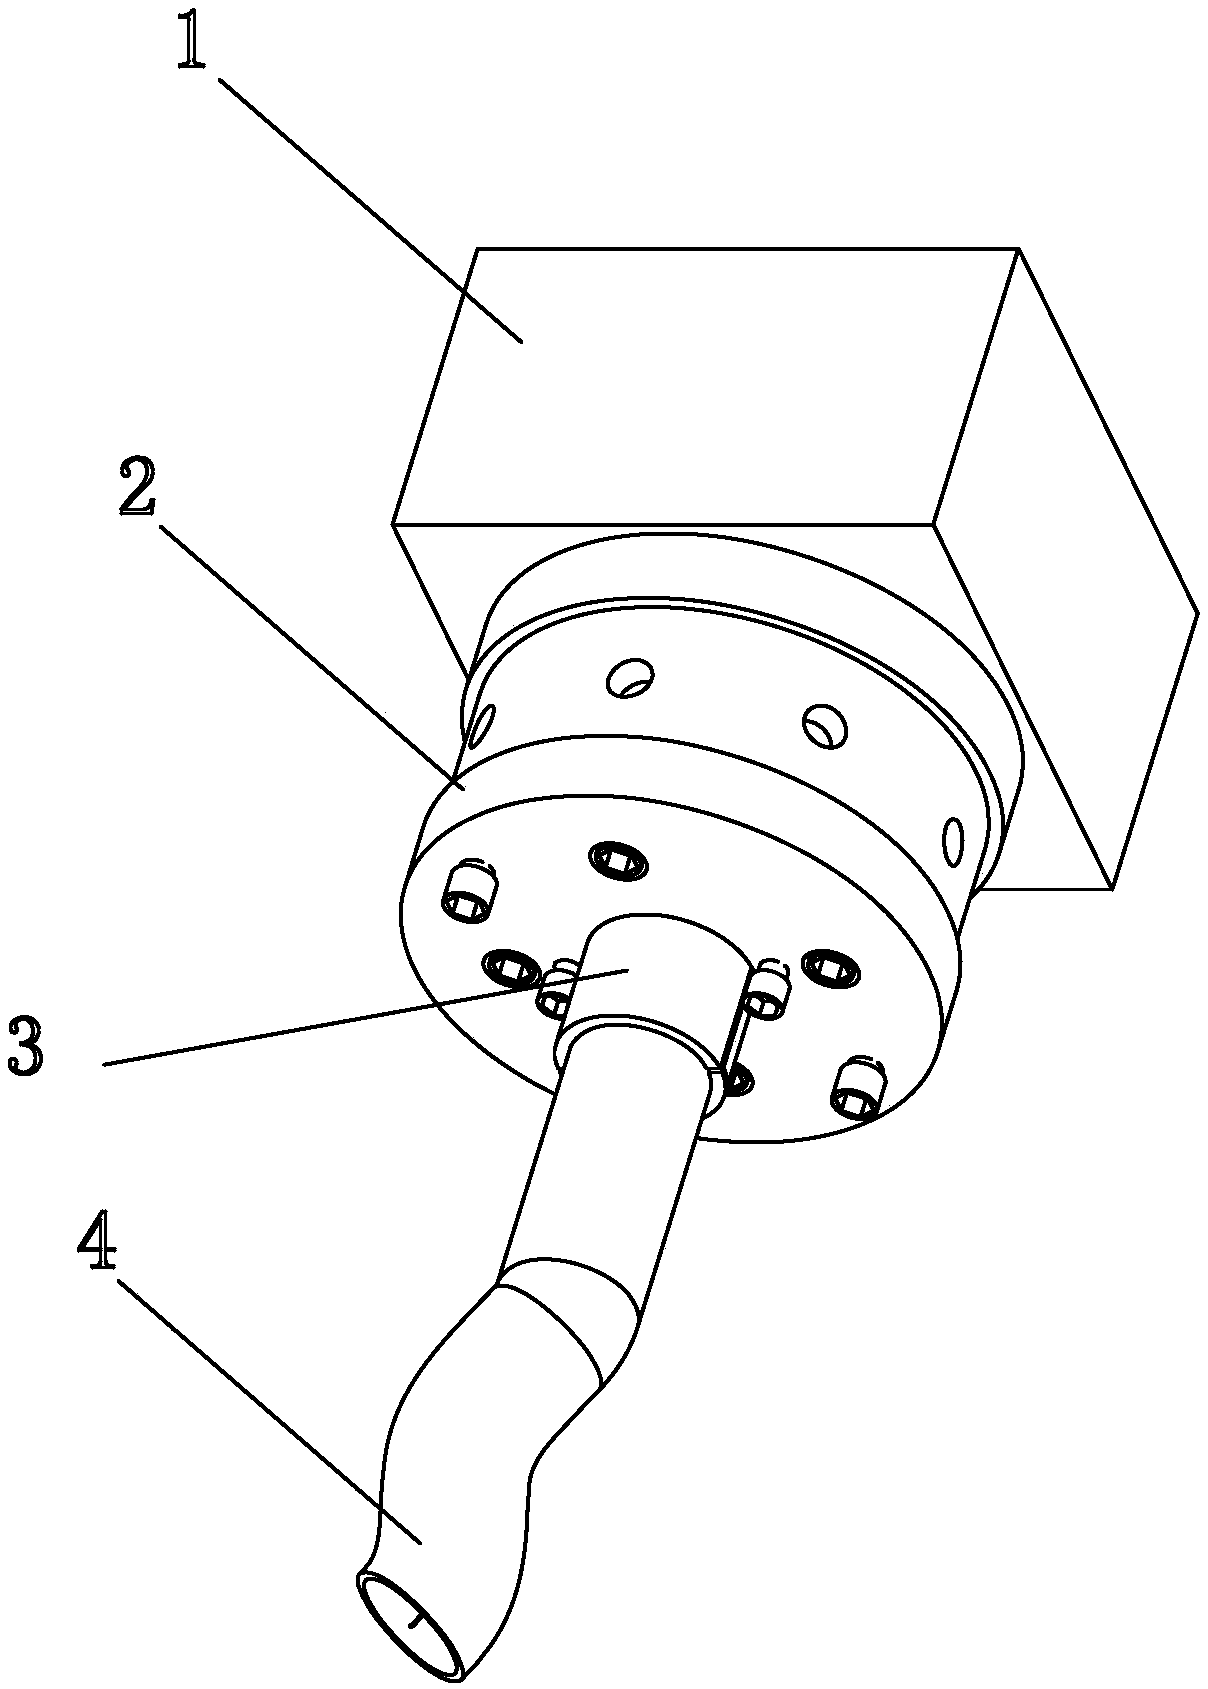 Quick locking and sealing device for hose